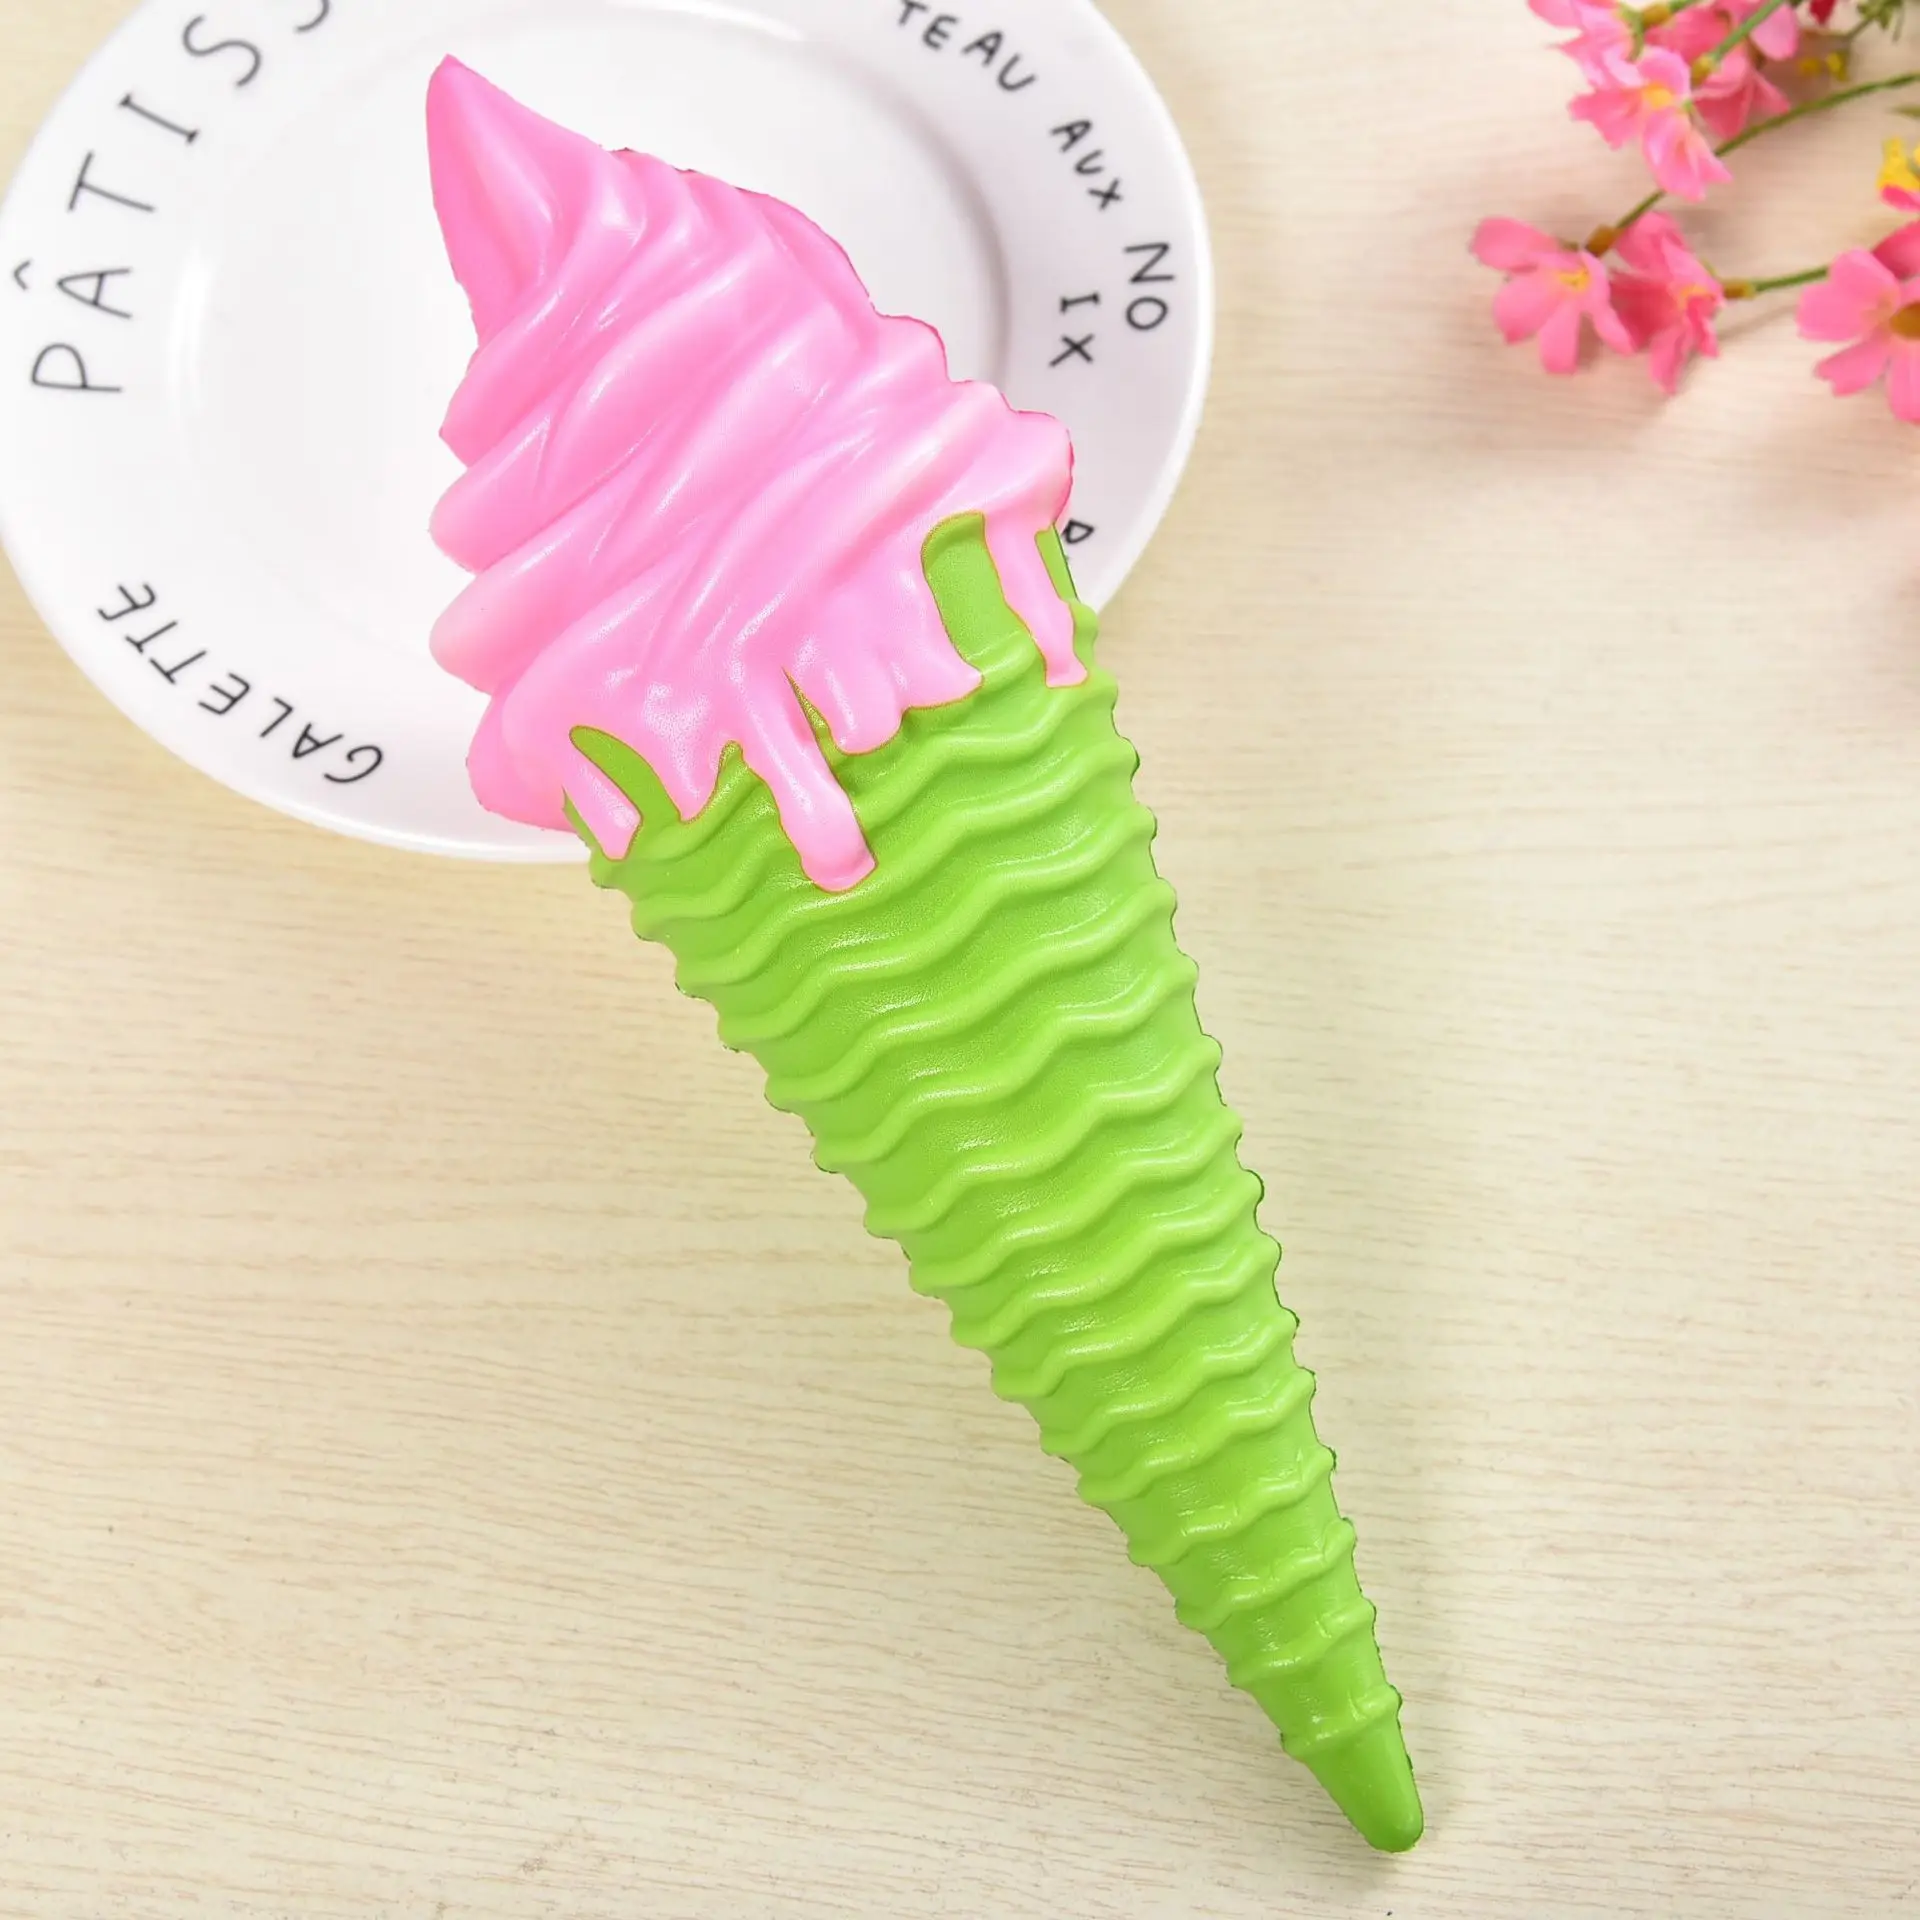 Colorful Ice Cream Squishy Slow Rising Soft Creative Squeeze Toys Simulation Stress Relief Funny Xmas Gift Toy for Kids pea popper fidget Squeeze Toys